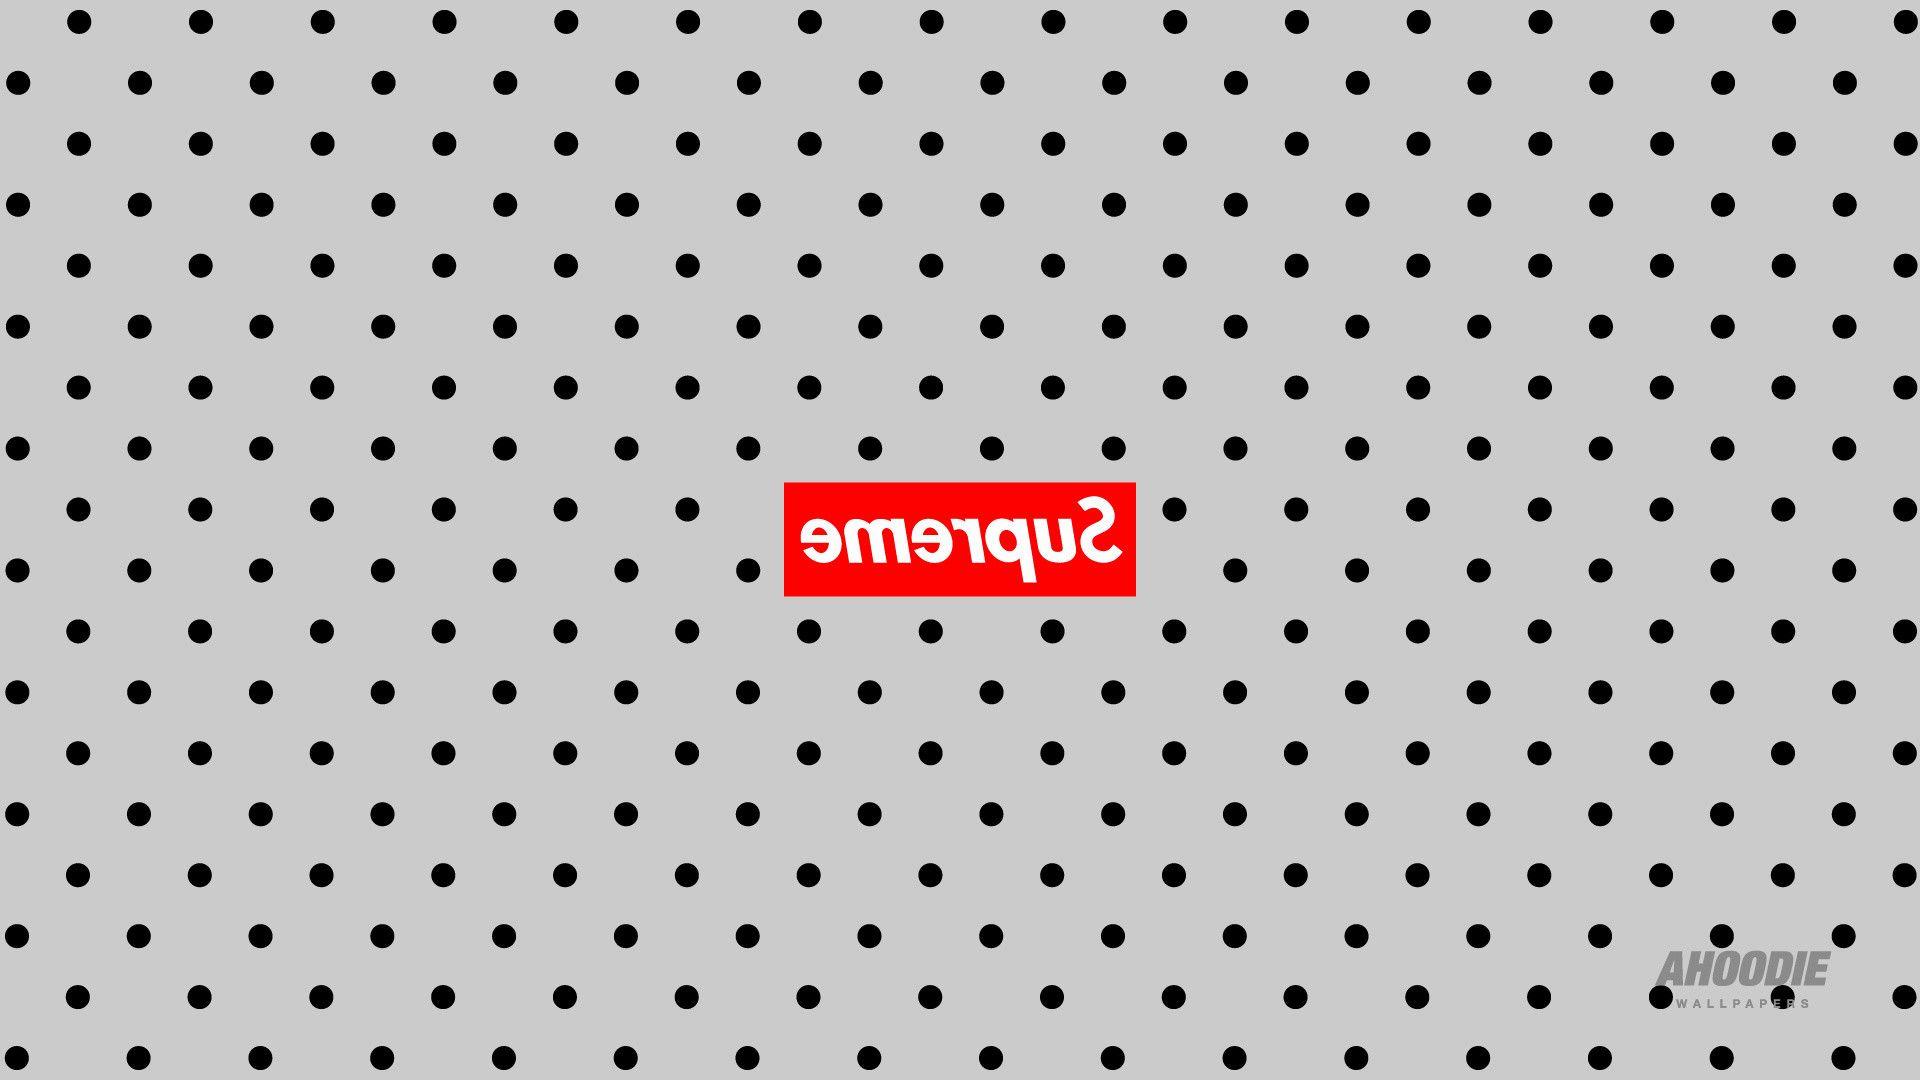 Made a CDG wallpaper inspired by there website  rstreetwear